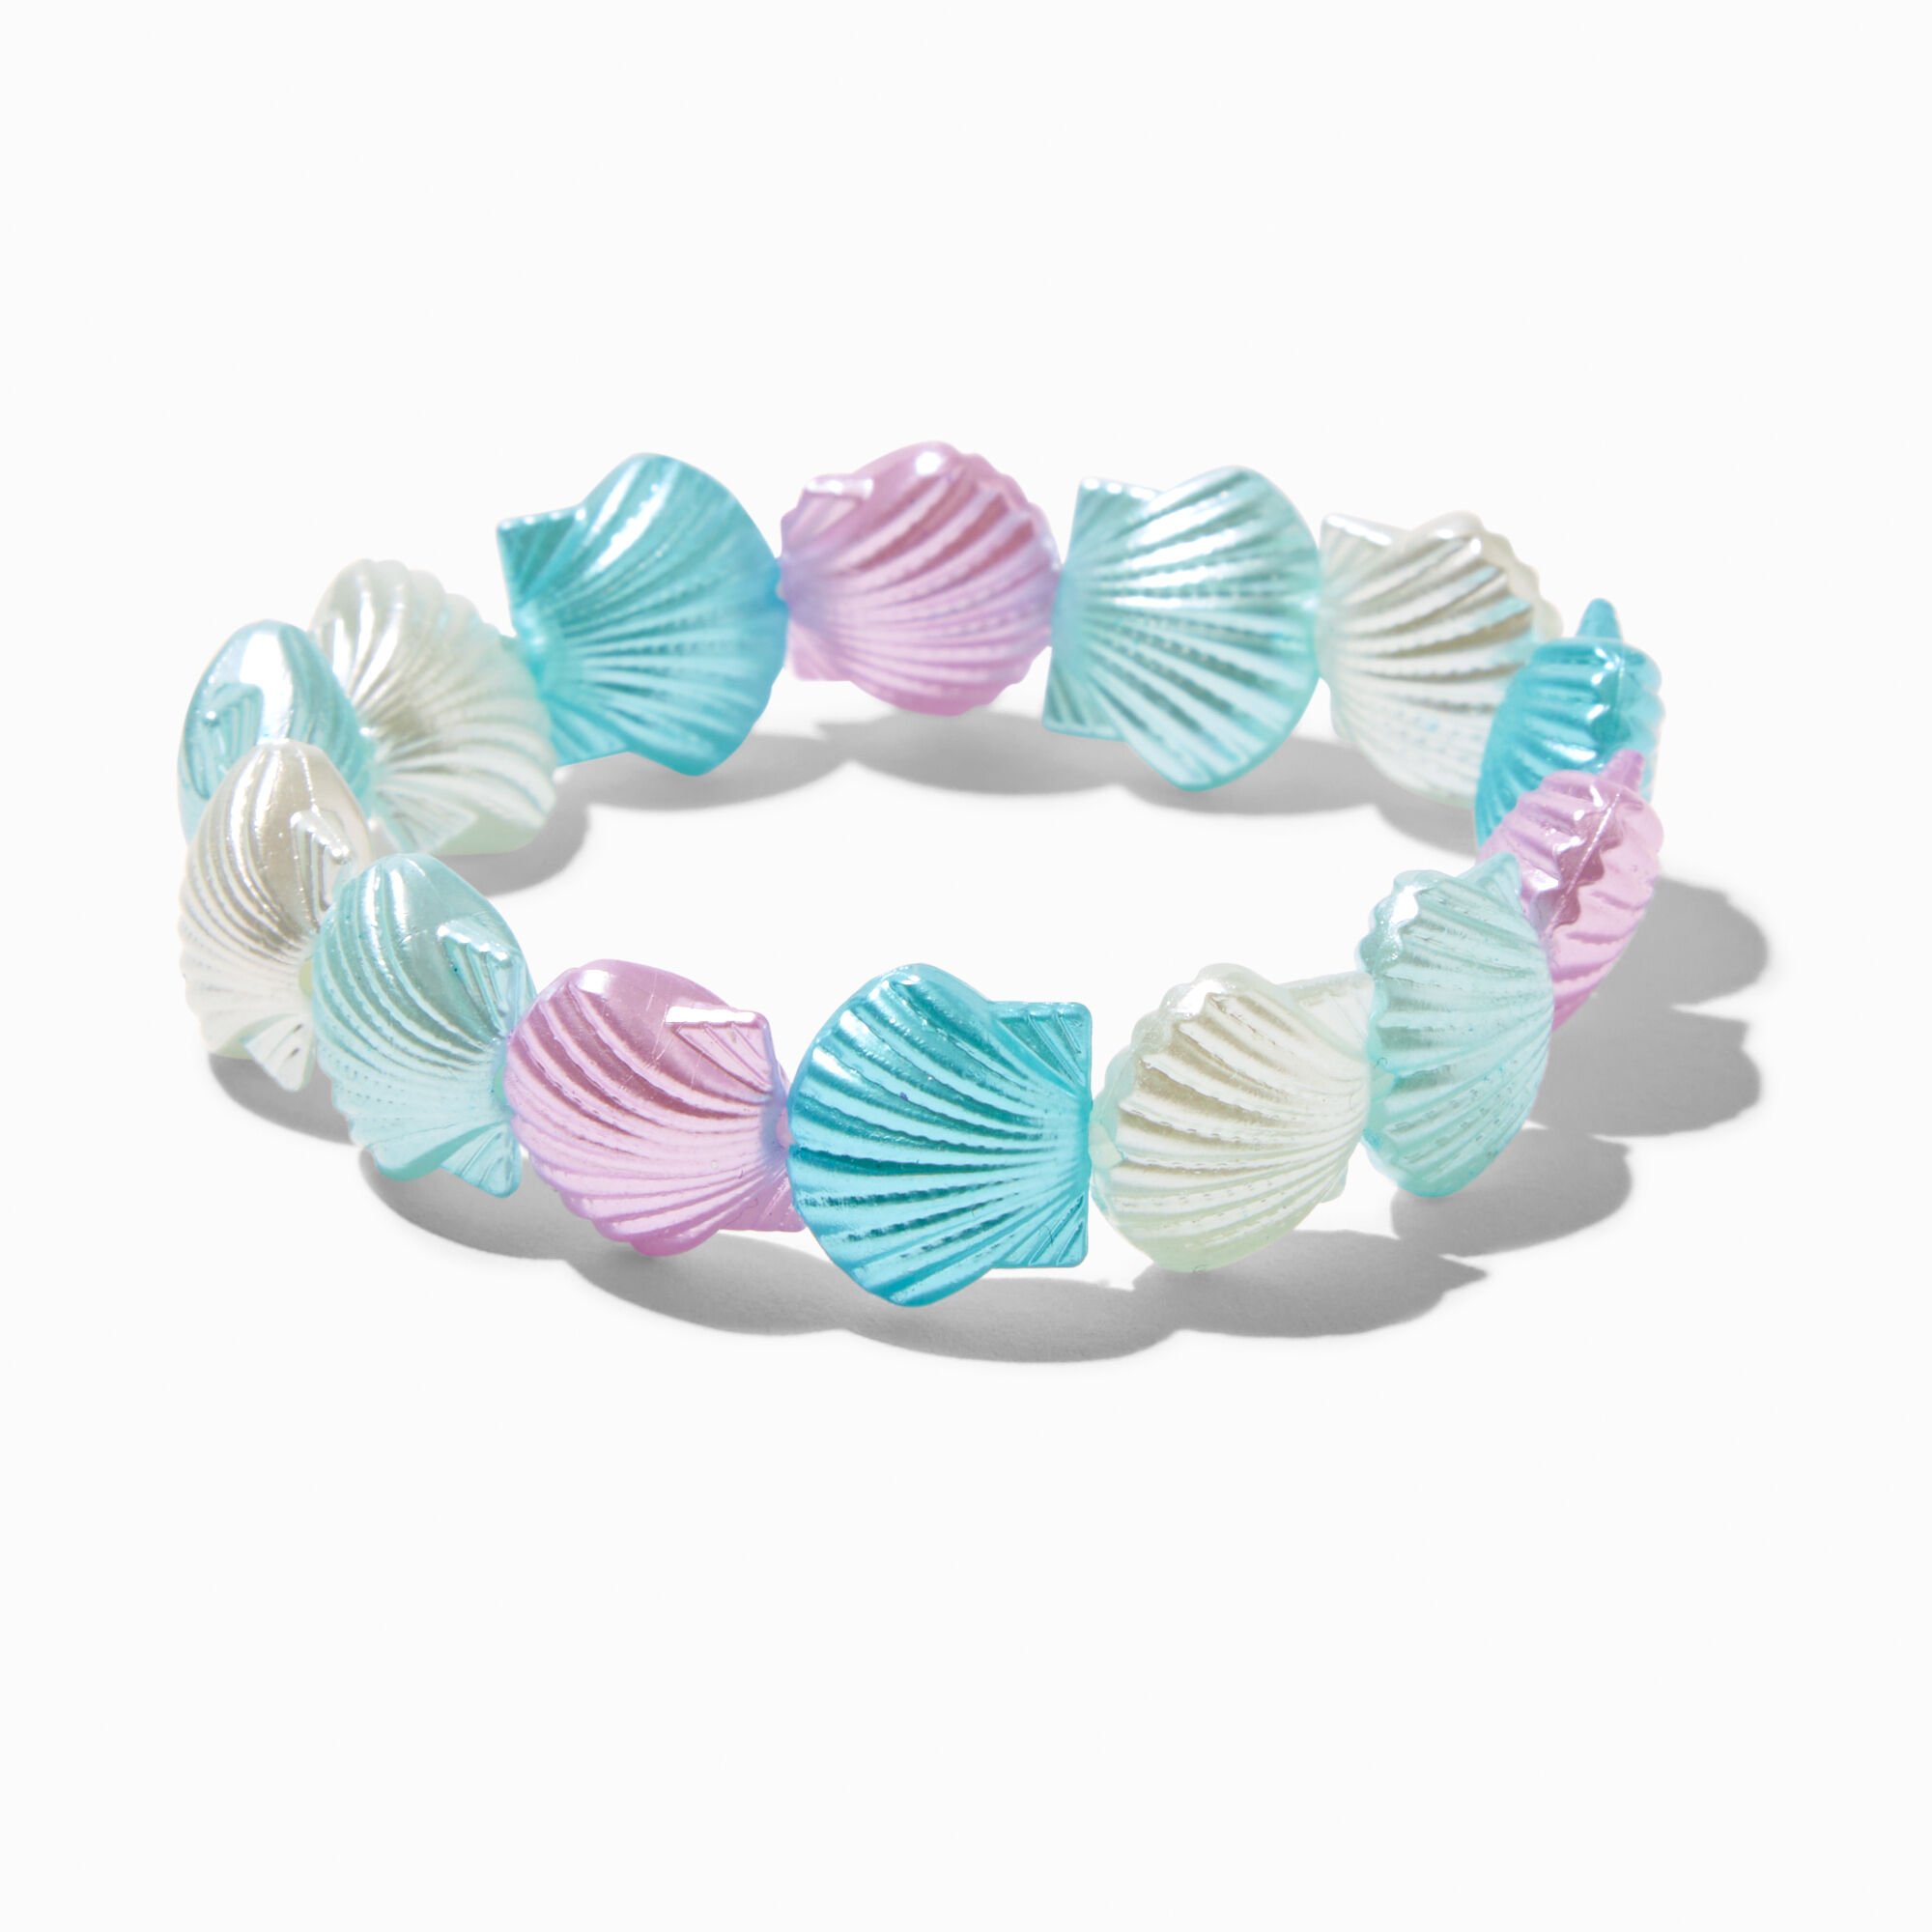 View Claires Club Mermaid Shell Stretch Bracelet information